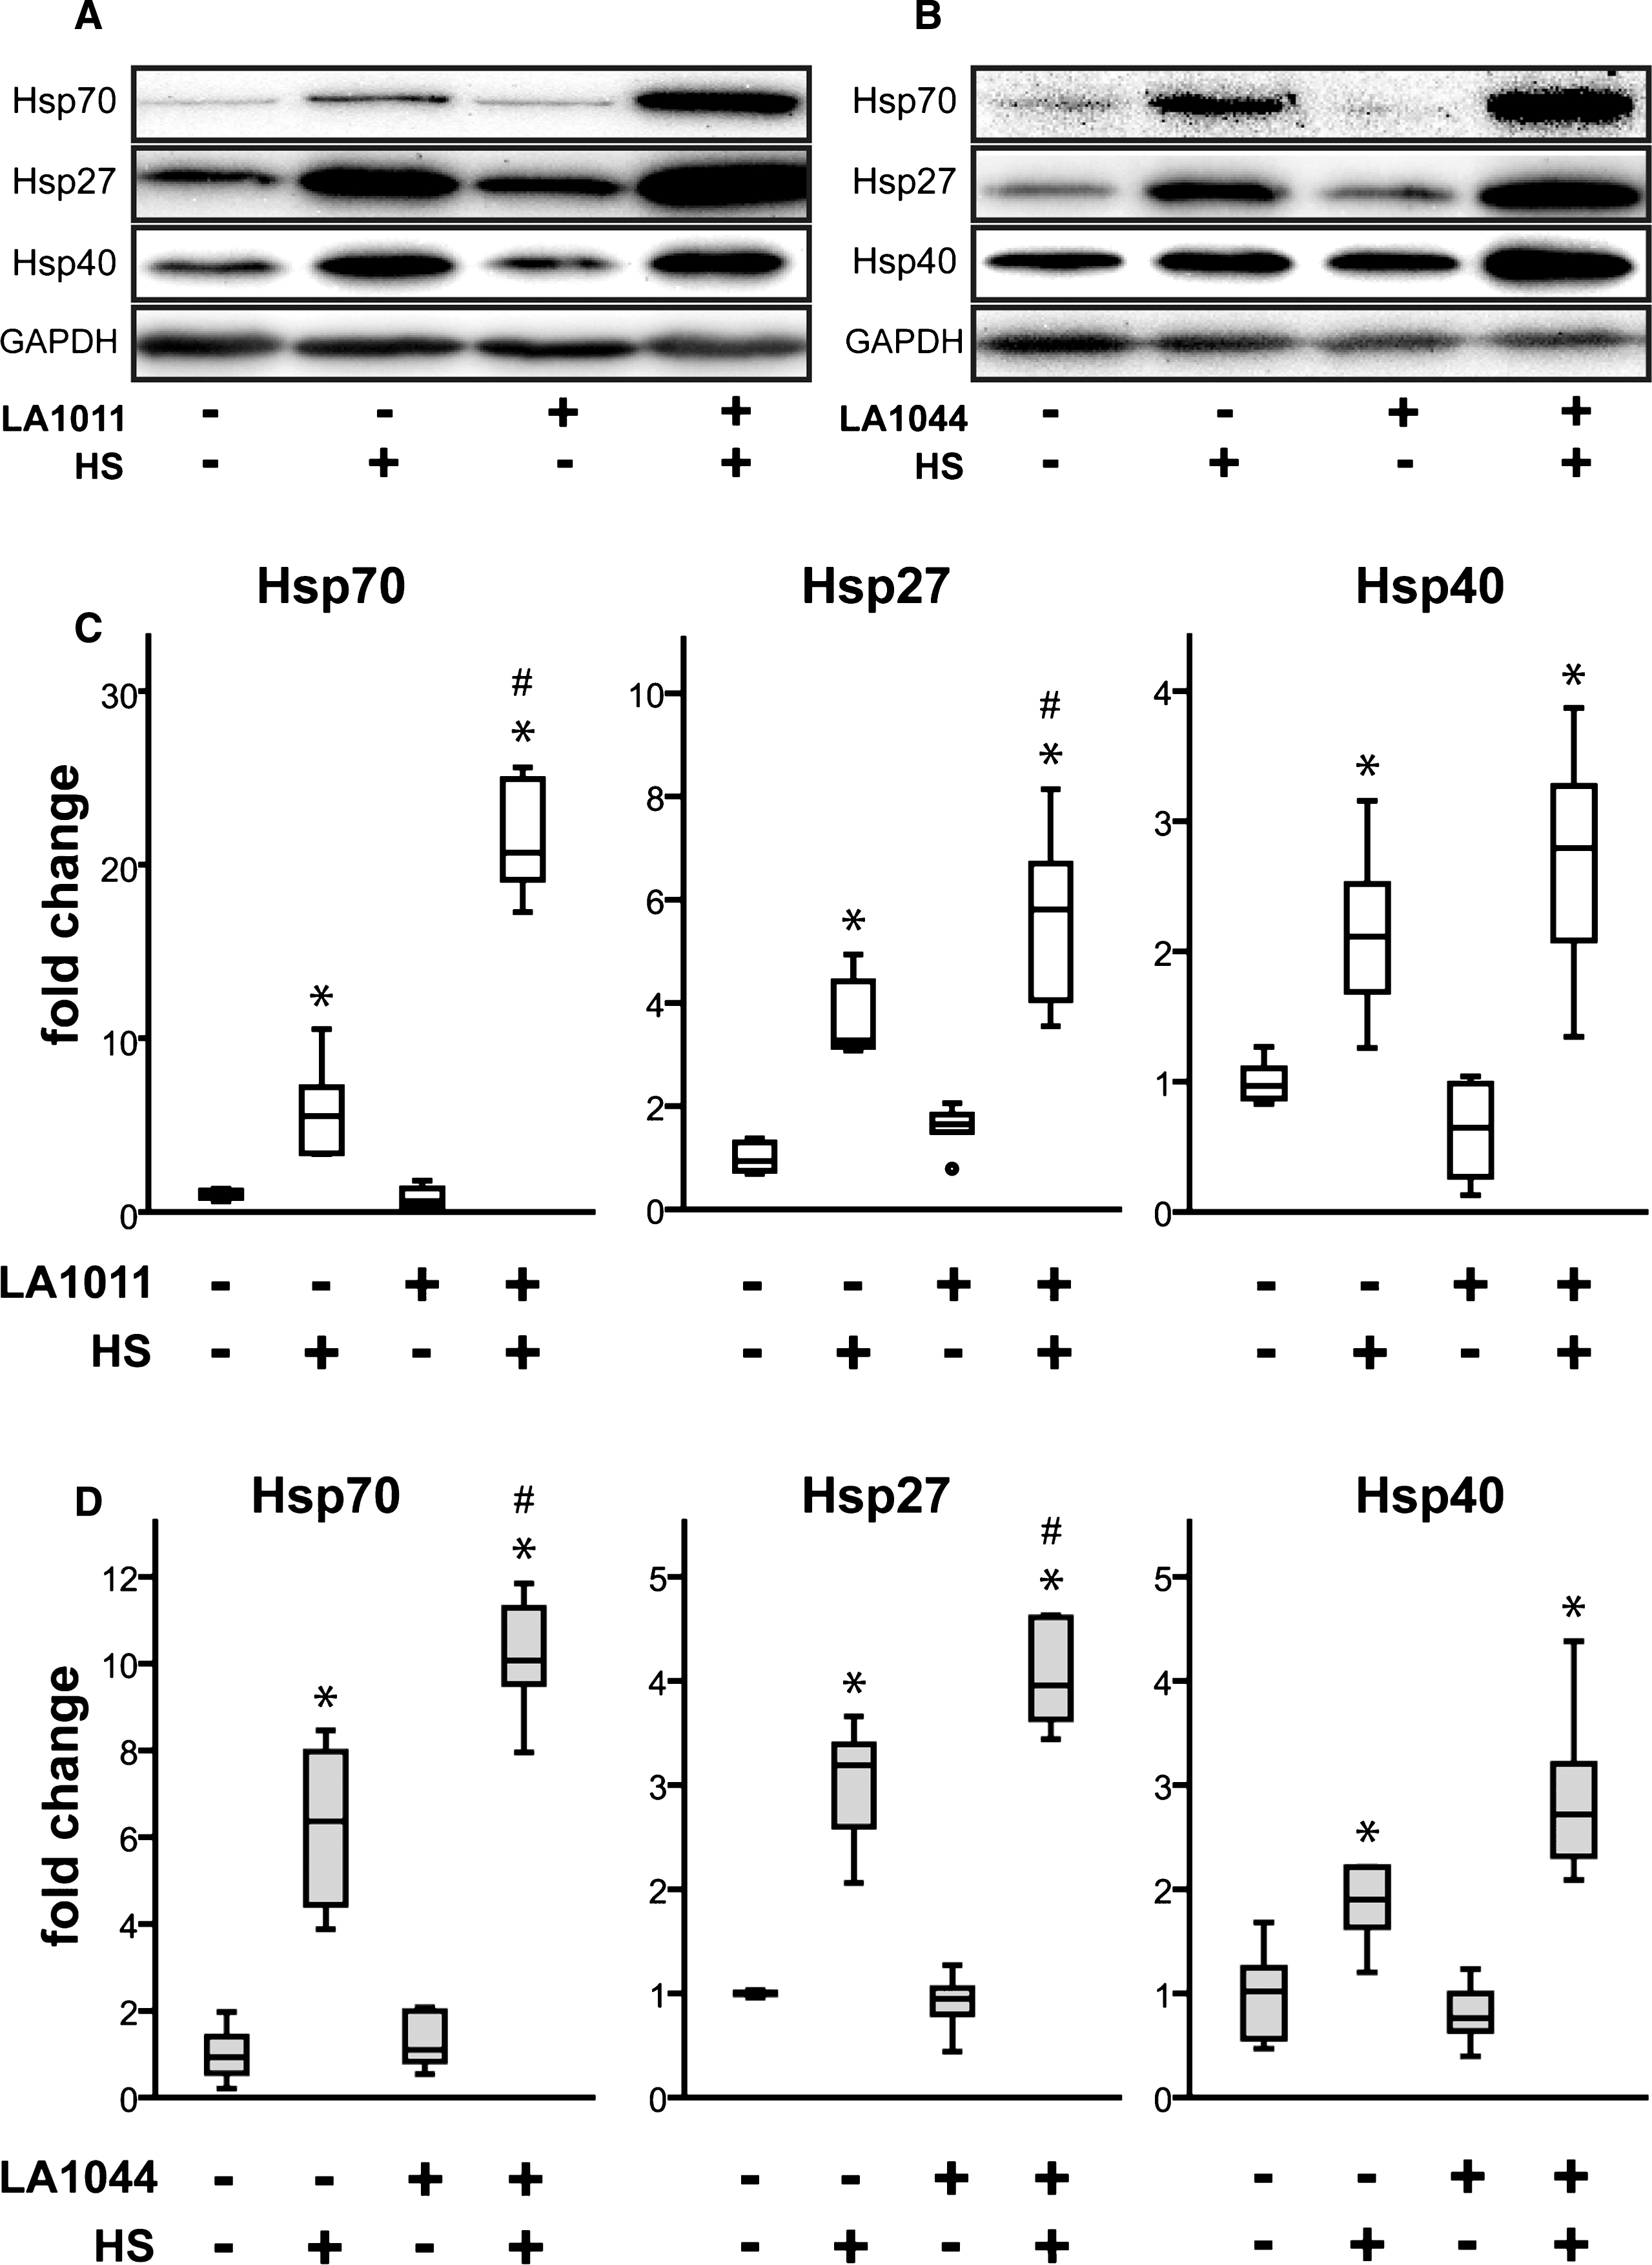 Effect of heat and LA1011 or LA1044 treatment on Hsp70, Hsp27 and Hsp40 levels in SH-SY5Y human neuroblastoma cell line measured by western blotting (A, B) and quantitative densitometric analysis (C, D). Cells were untreated or treated with LA1011 (5μM) or LA1044 (40μM) at 37°C or 42°C. Box plots represent quantitative data normalized to GAPDH. All data represent the mean±SD (n = 6) and p < 0.05 was considered statistically significant. HS = heat shock at 42°C, 1 h. *p < 0.05, when data are compared to LA compound (–), HS (–) sample. #p < 0.05, when data are compared to LA compound (–), HS (+) sample. One way ANOVA followed by a Tukey post hoc test was used for statistical comparisons.